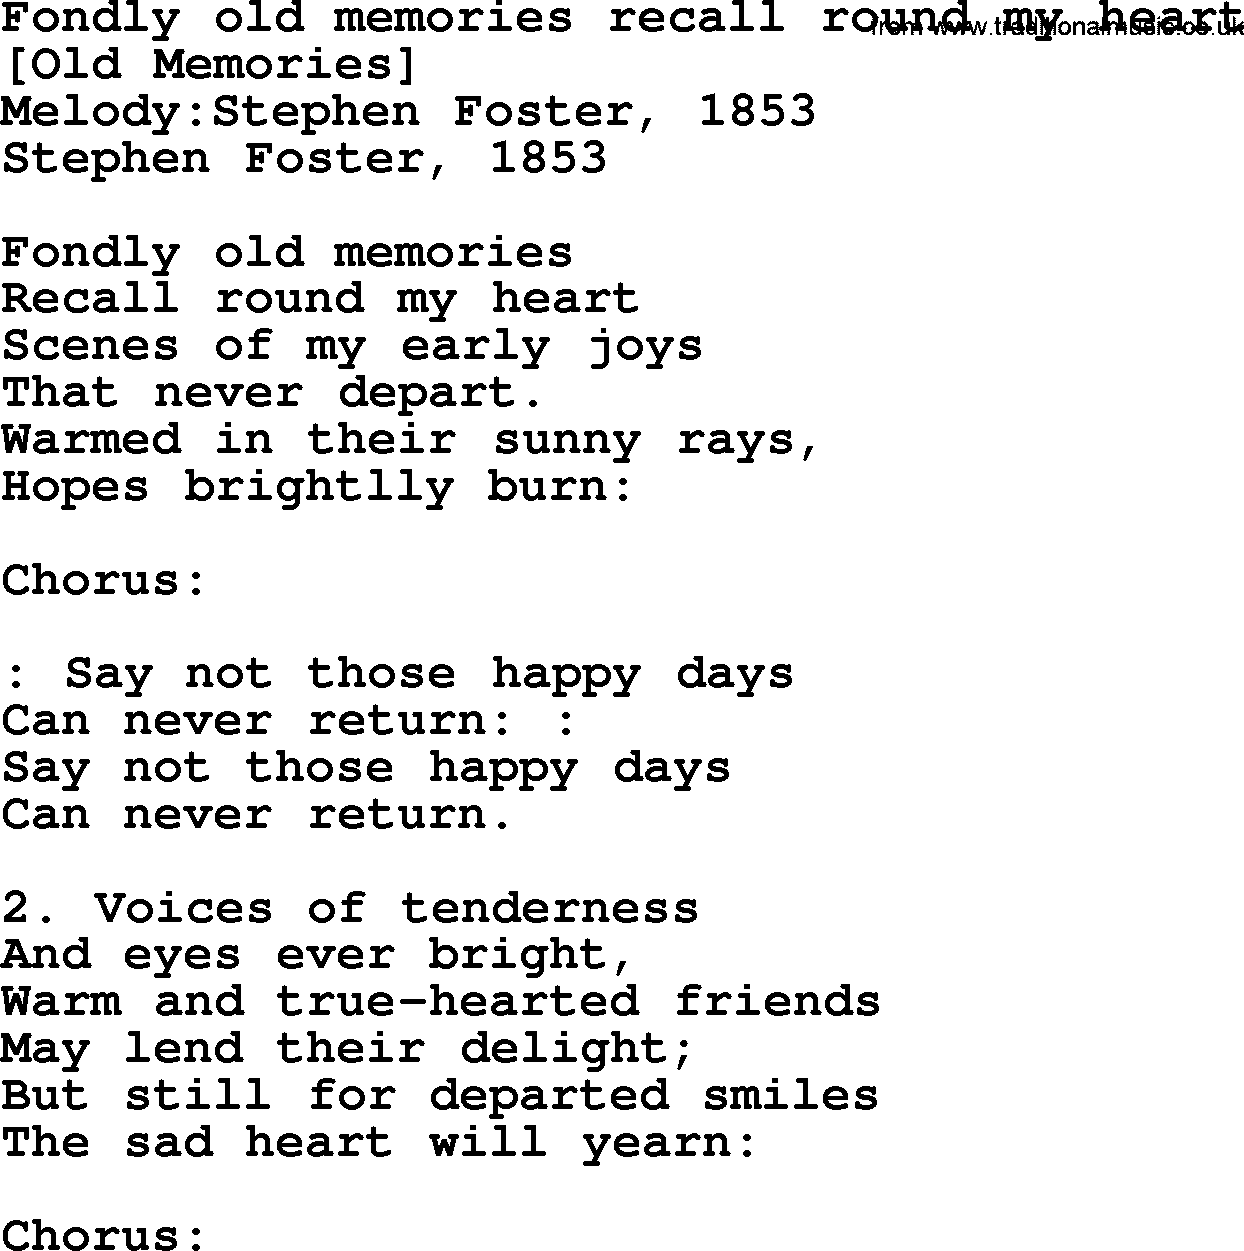 Old American Song: Fondly Old Memories Recall Round My Heart, lyrics